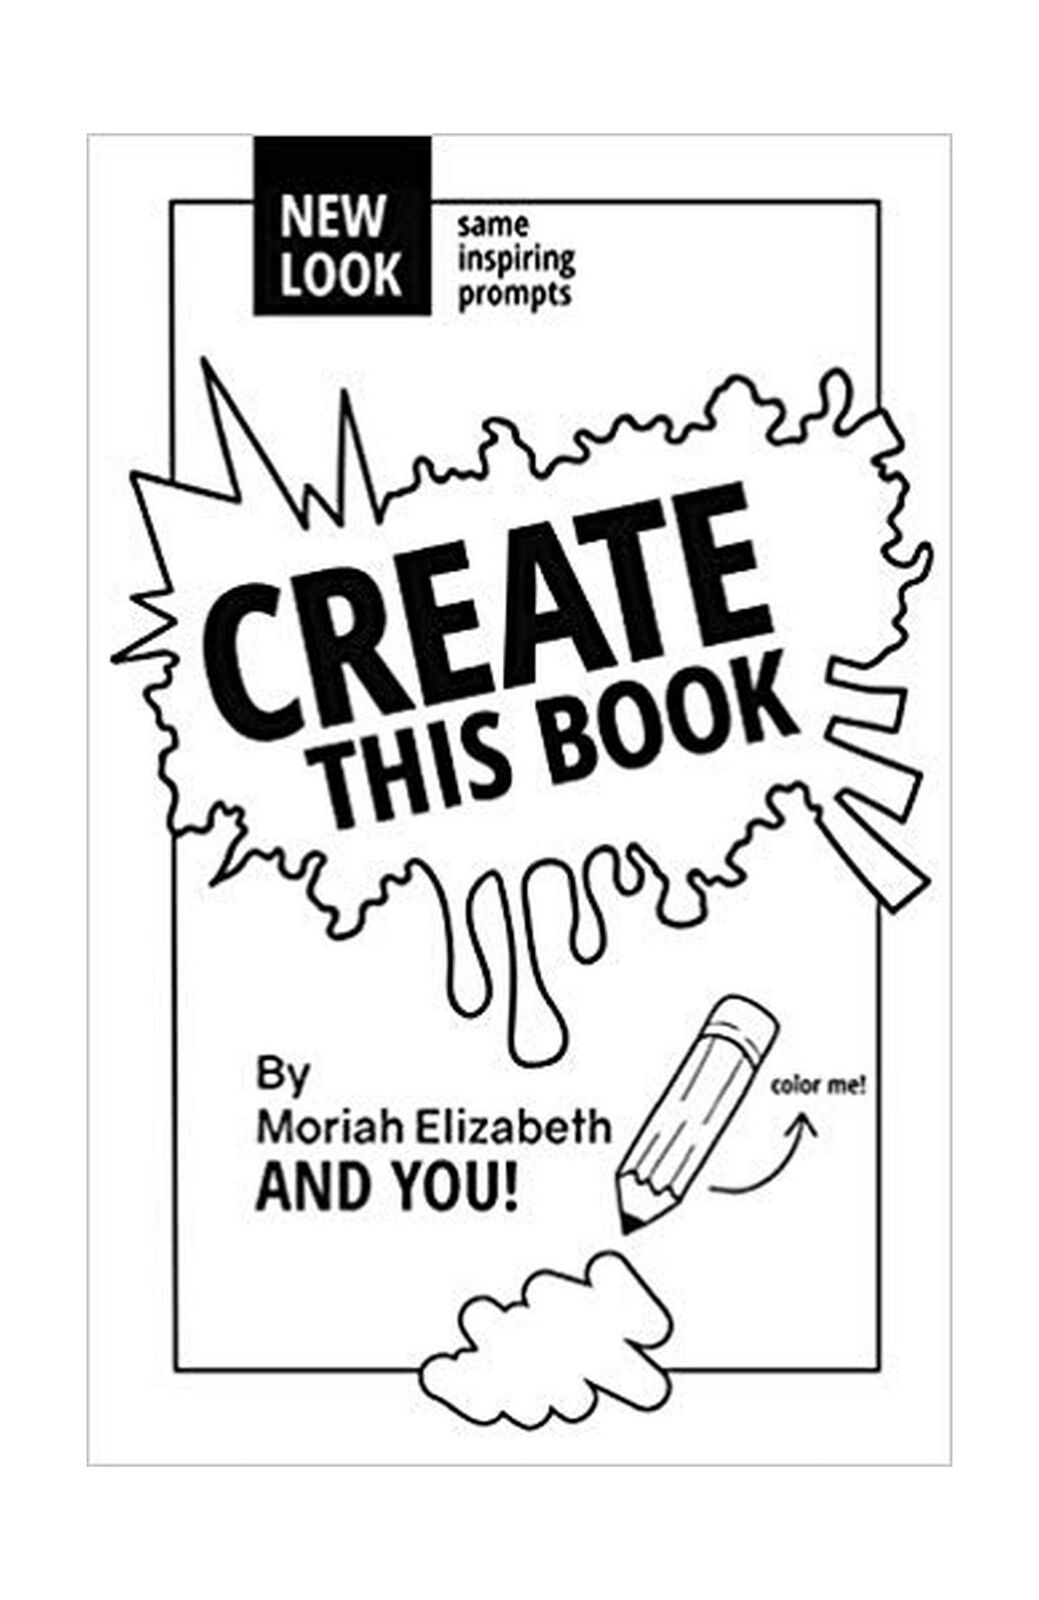 I chose for one of my Create this Book by Moriah Elizabeth to do